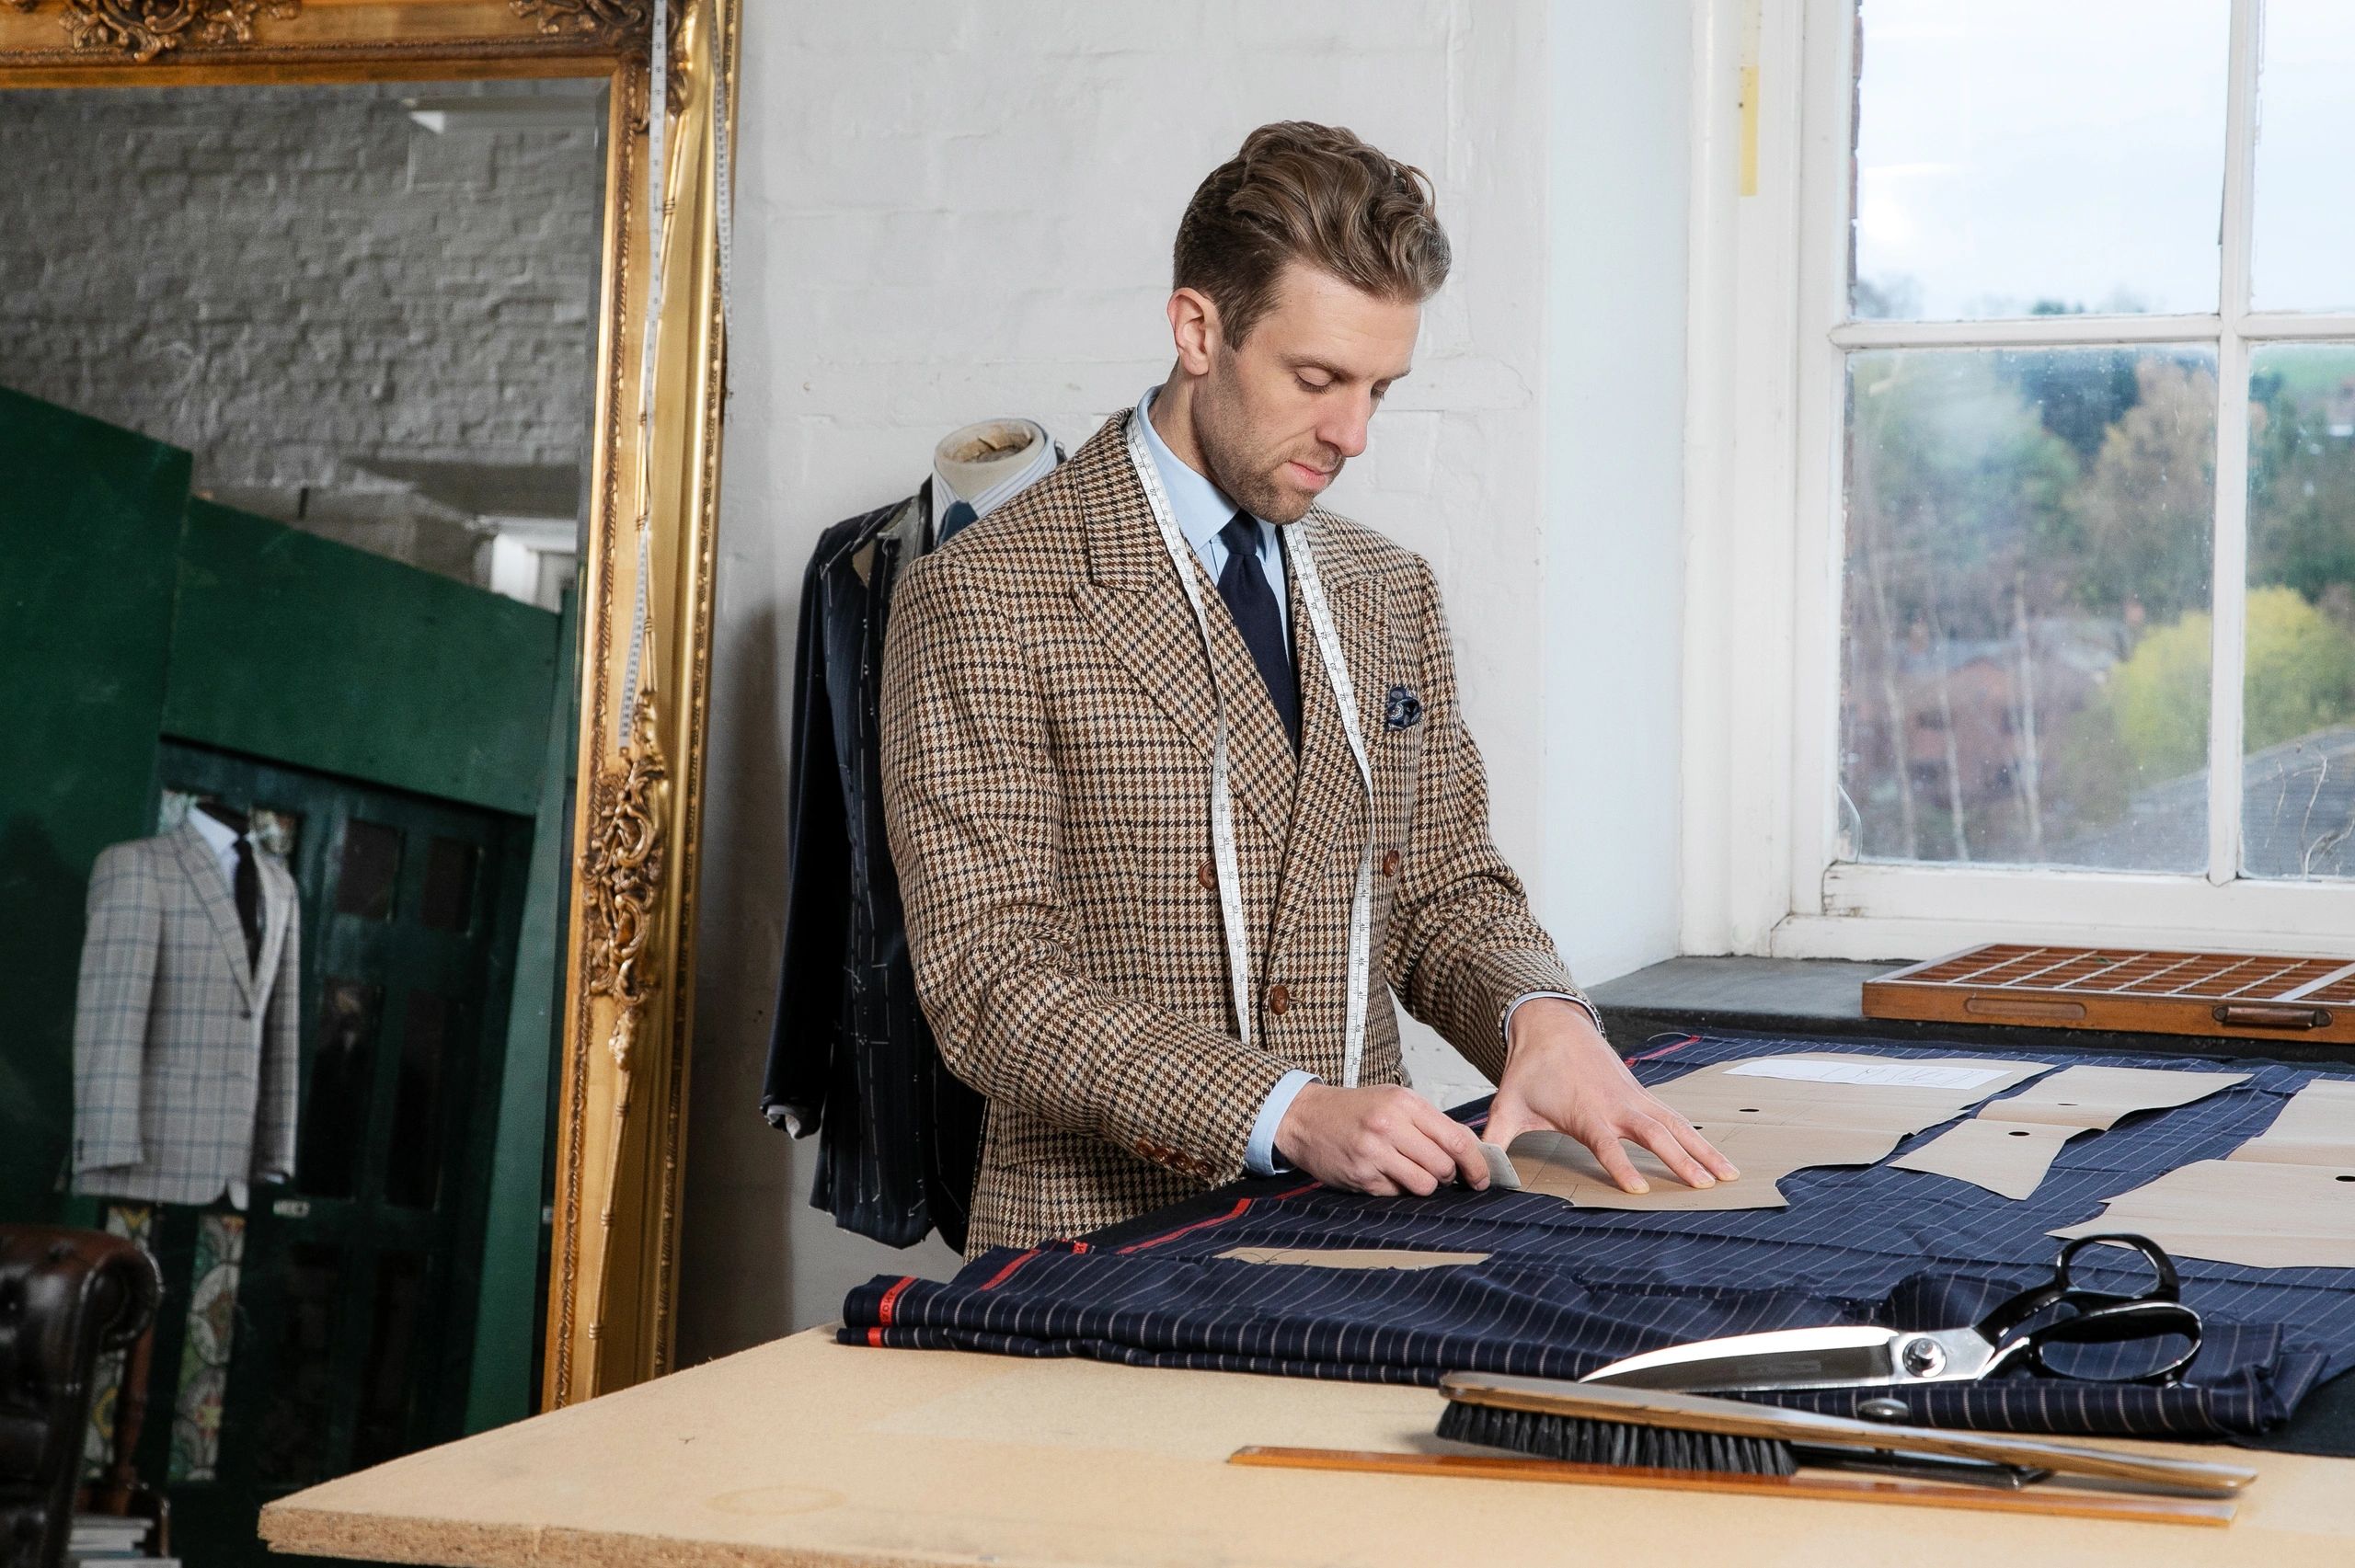 Nicholas striking a bespoke suit at his work board at the depot